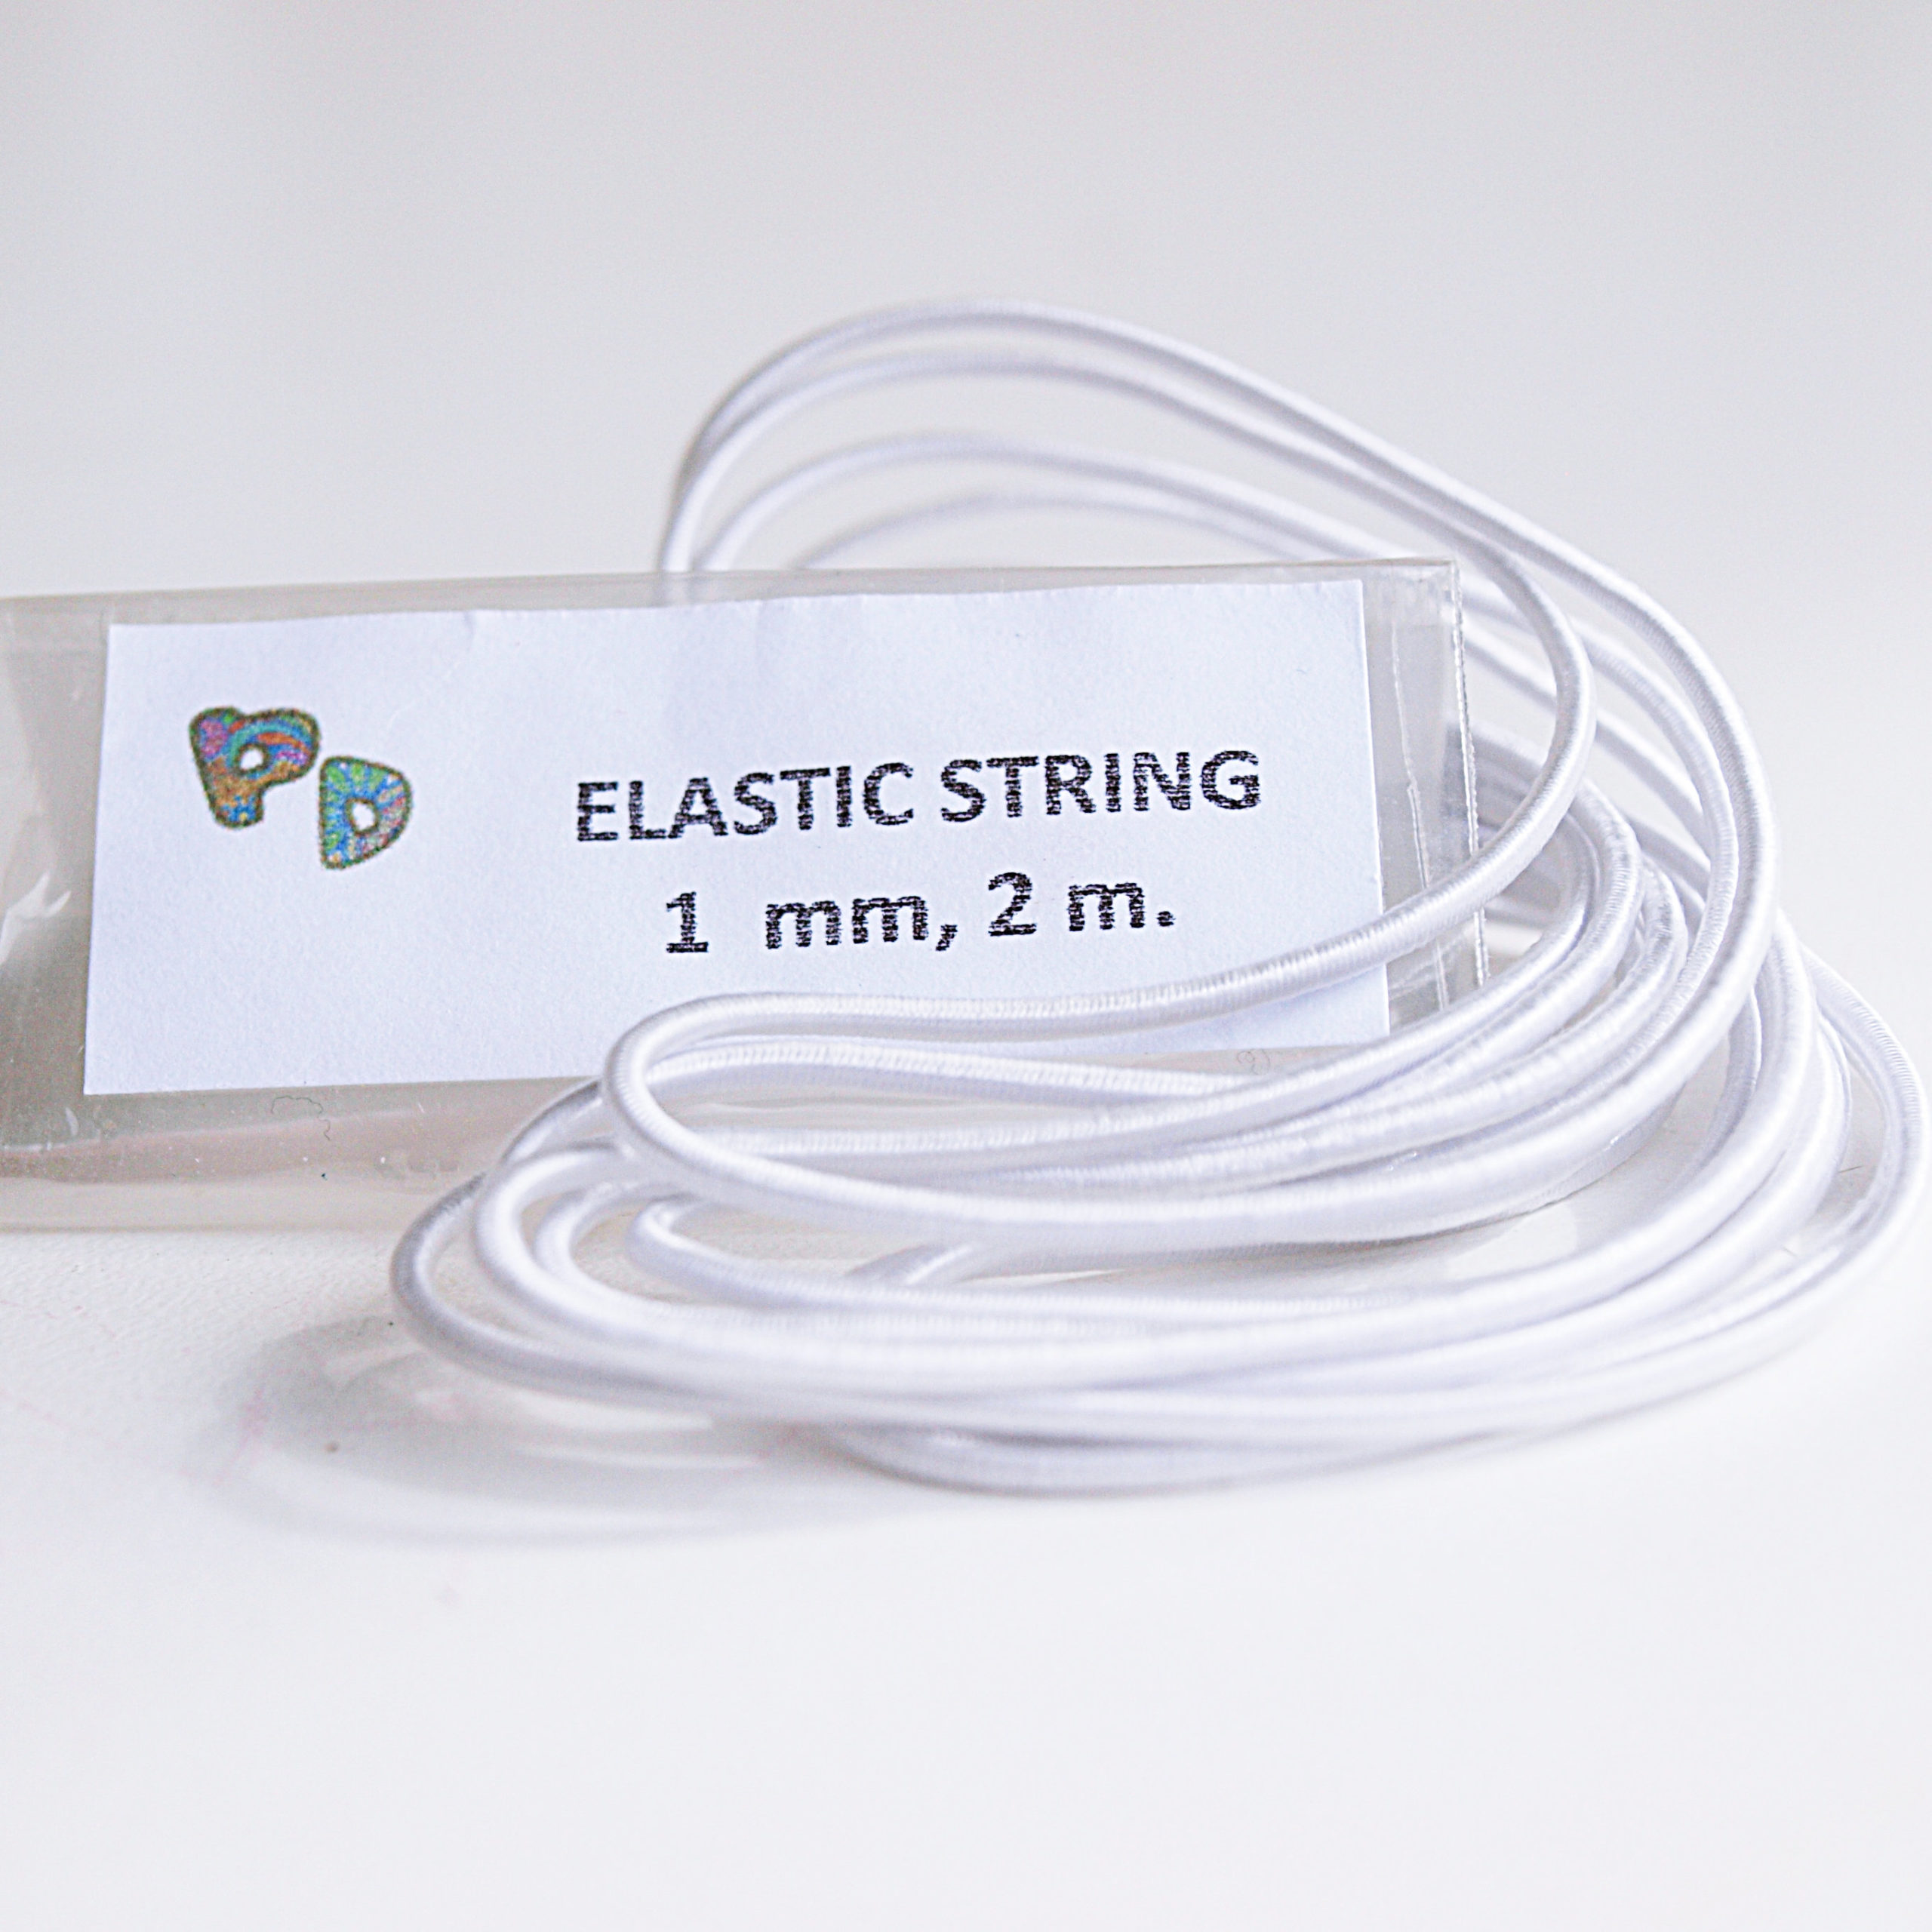 3mm Re-stringing Doll Stringing Elastic Cord x 3 metres Professional Quality